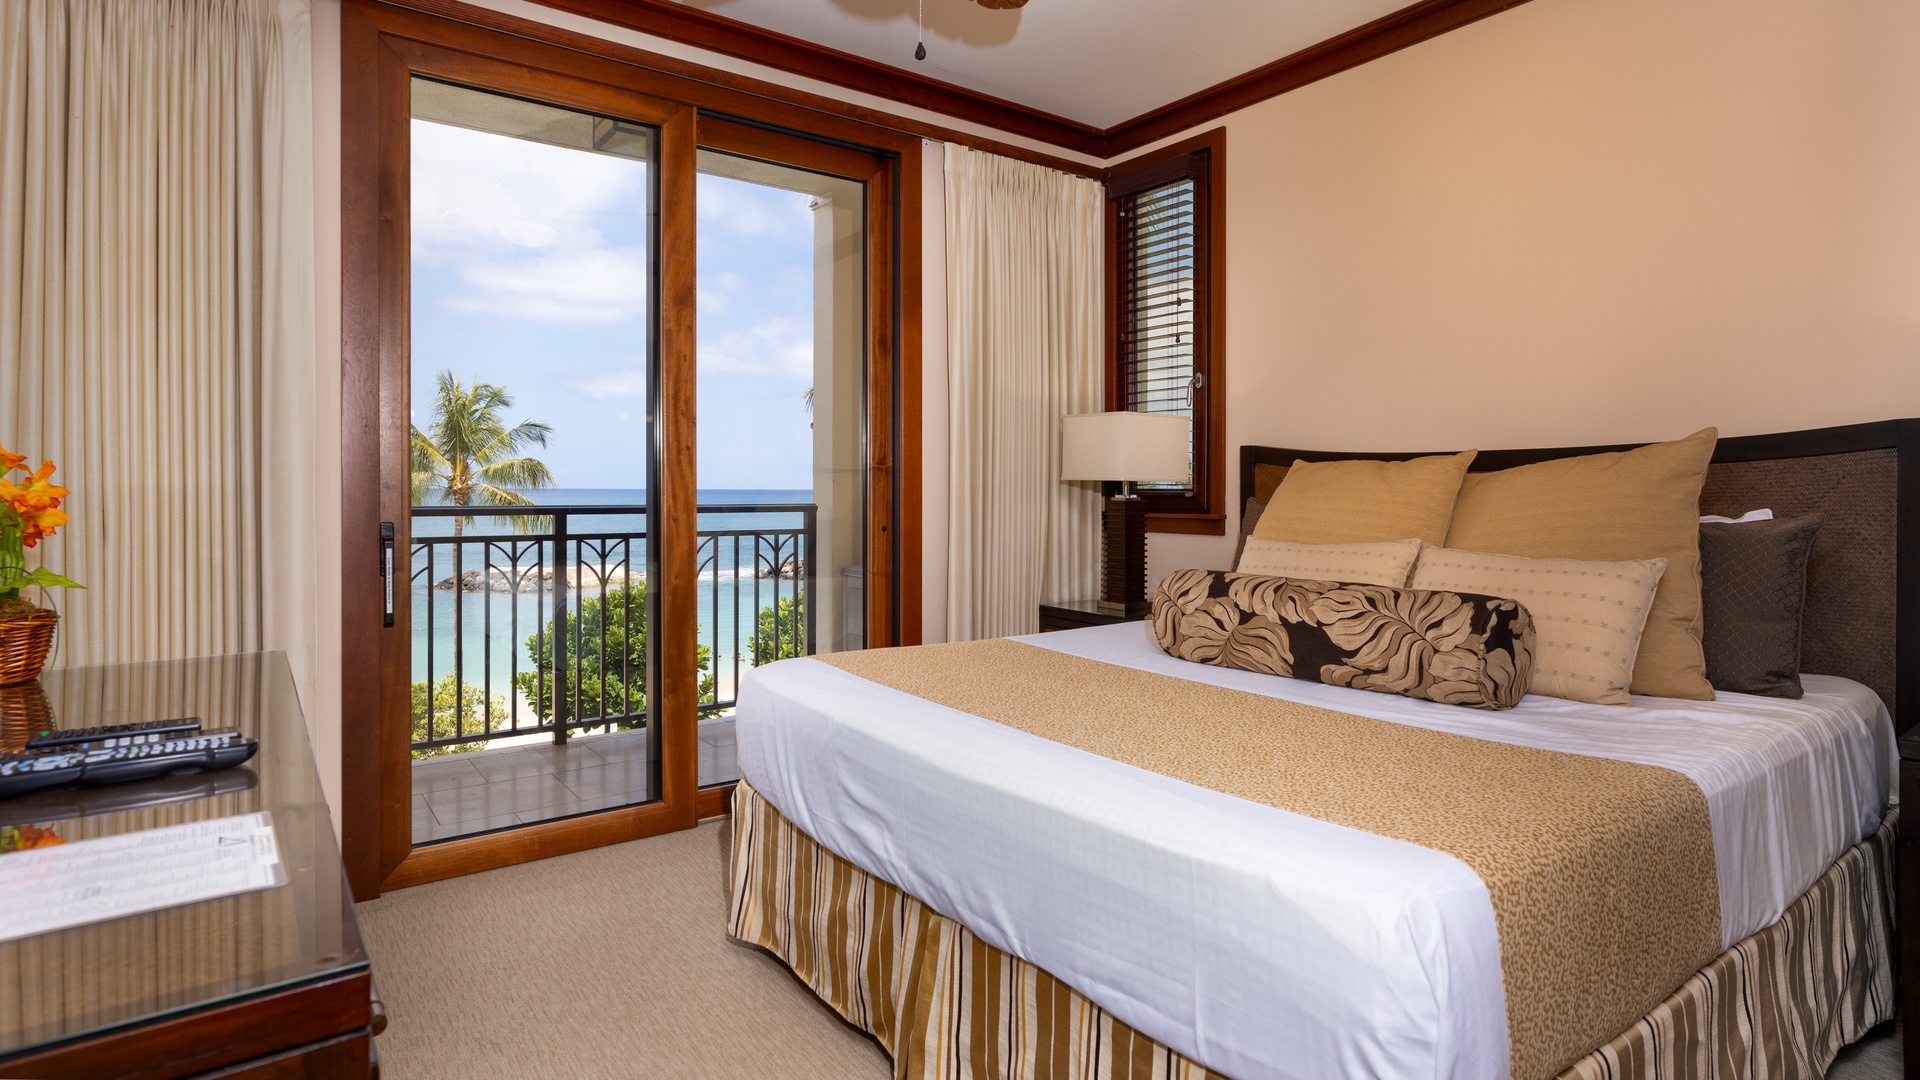 Kapolei Vacation Rentals, Ko Olina Beach Villas B310 - The primary guest bedroom with access to the lanai and views of the sea.